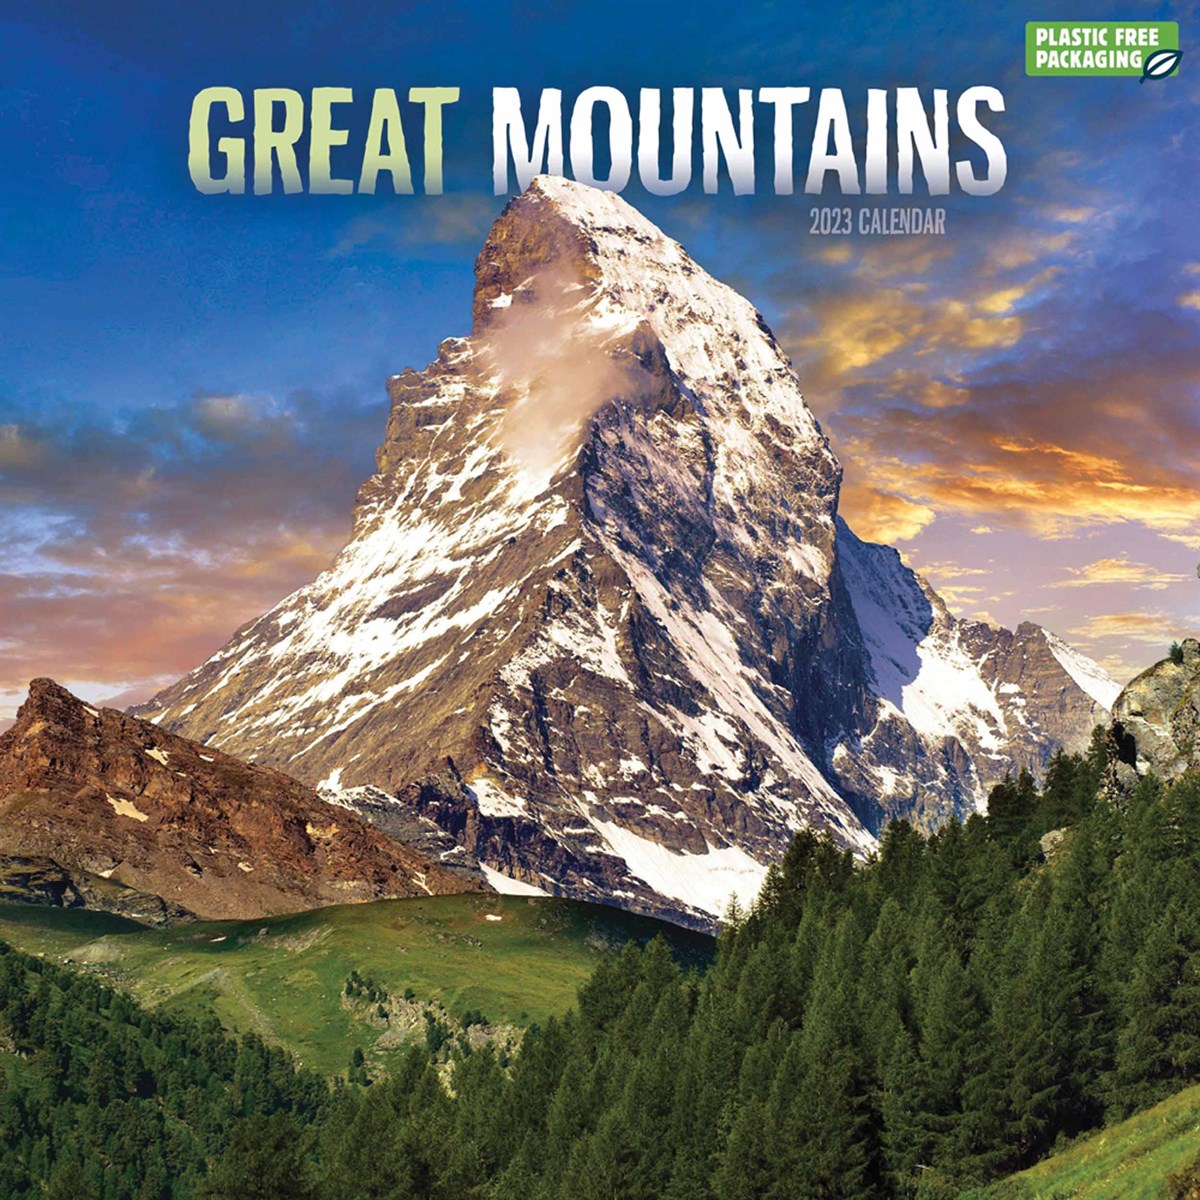 Great Mountains 2023 Calendars